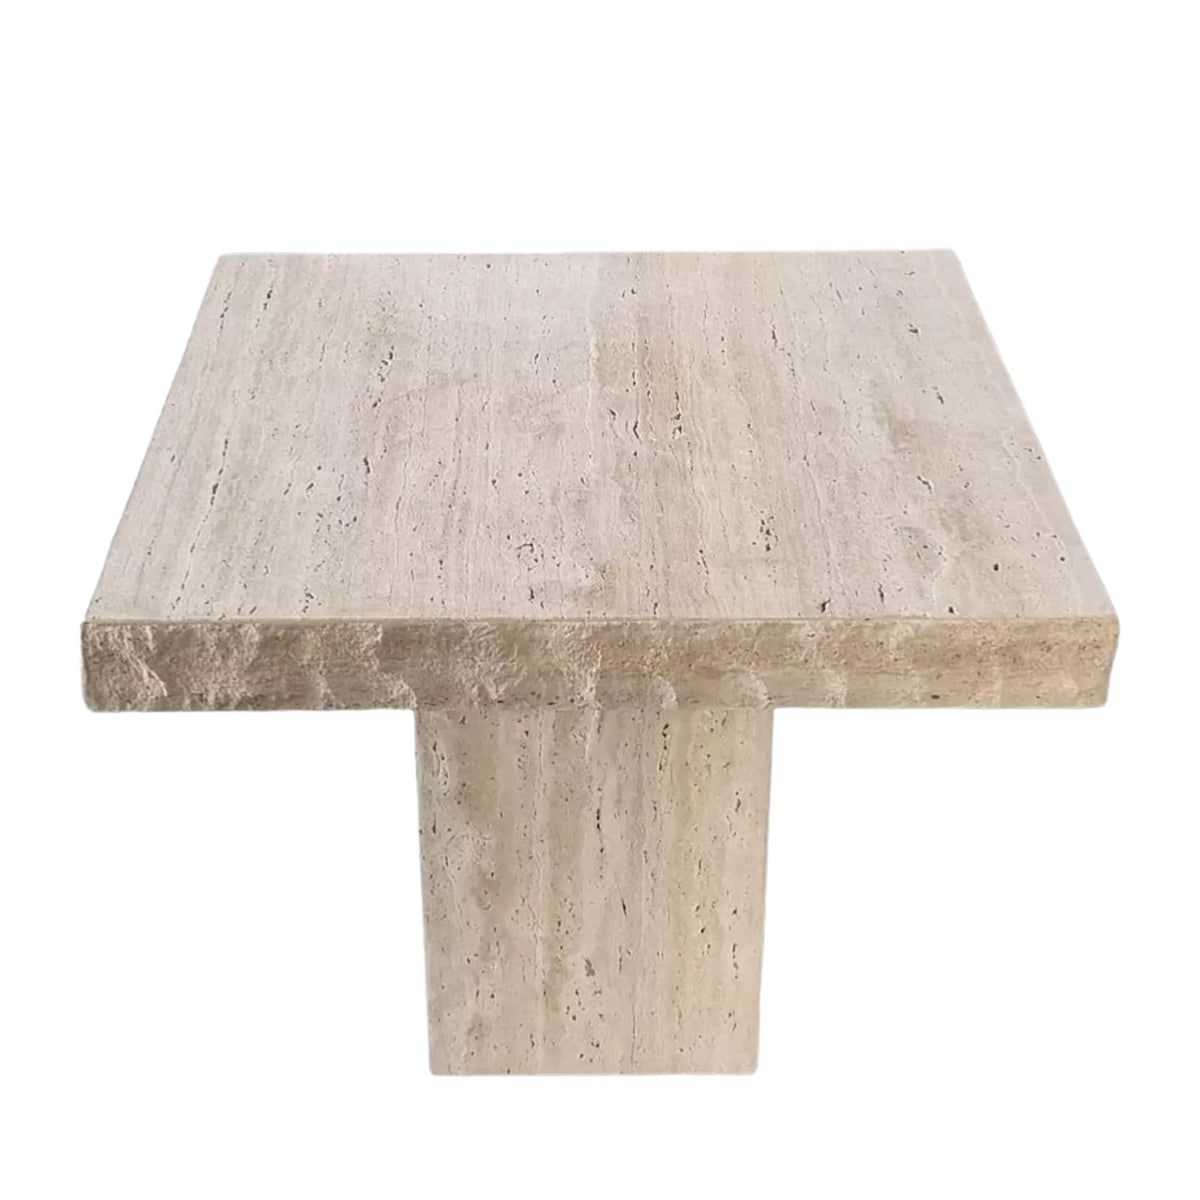 ROSA HAND CRAFTED ORGANIC TRAVERTINE SIDE TABLE WITH NATURAL EDGE